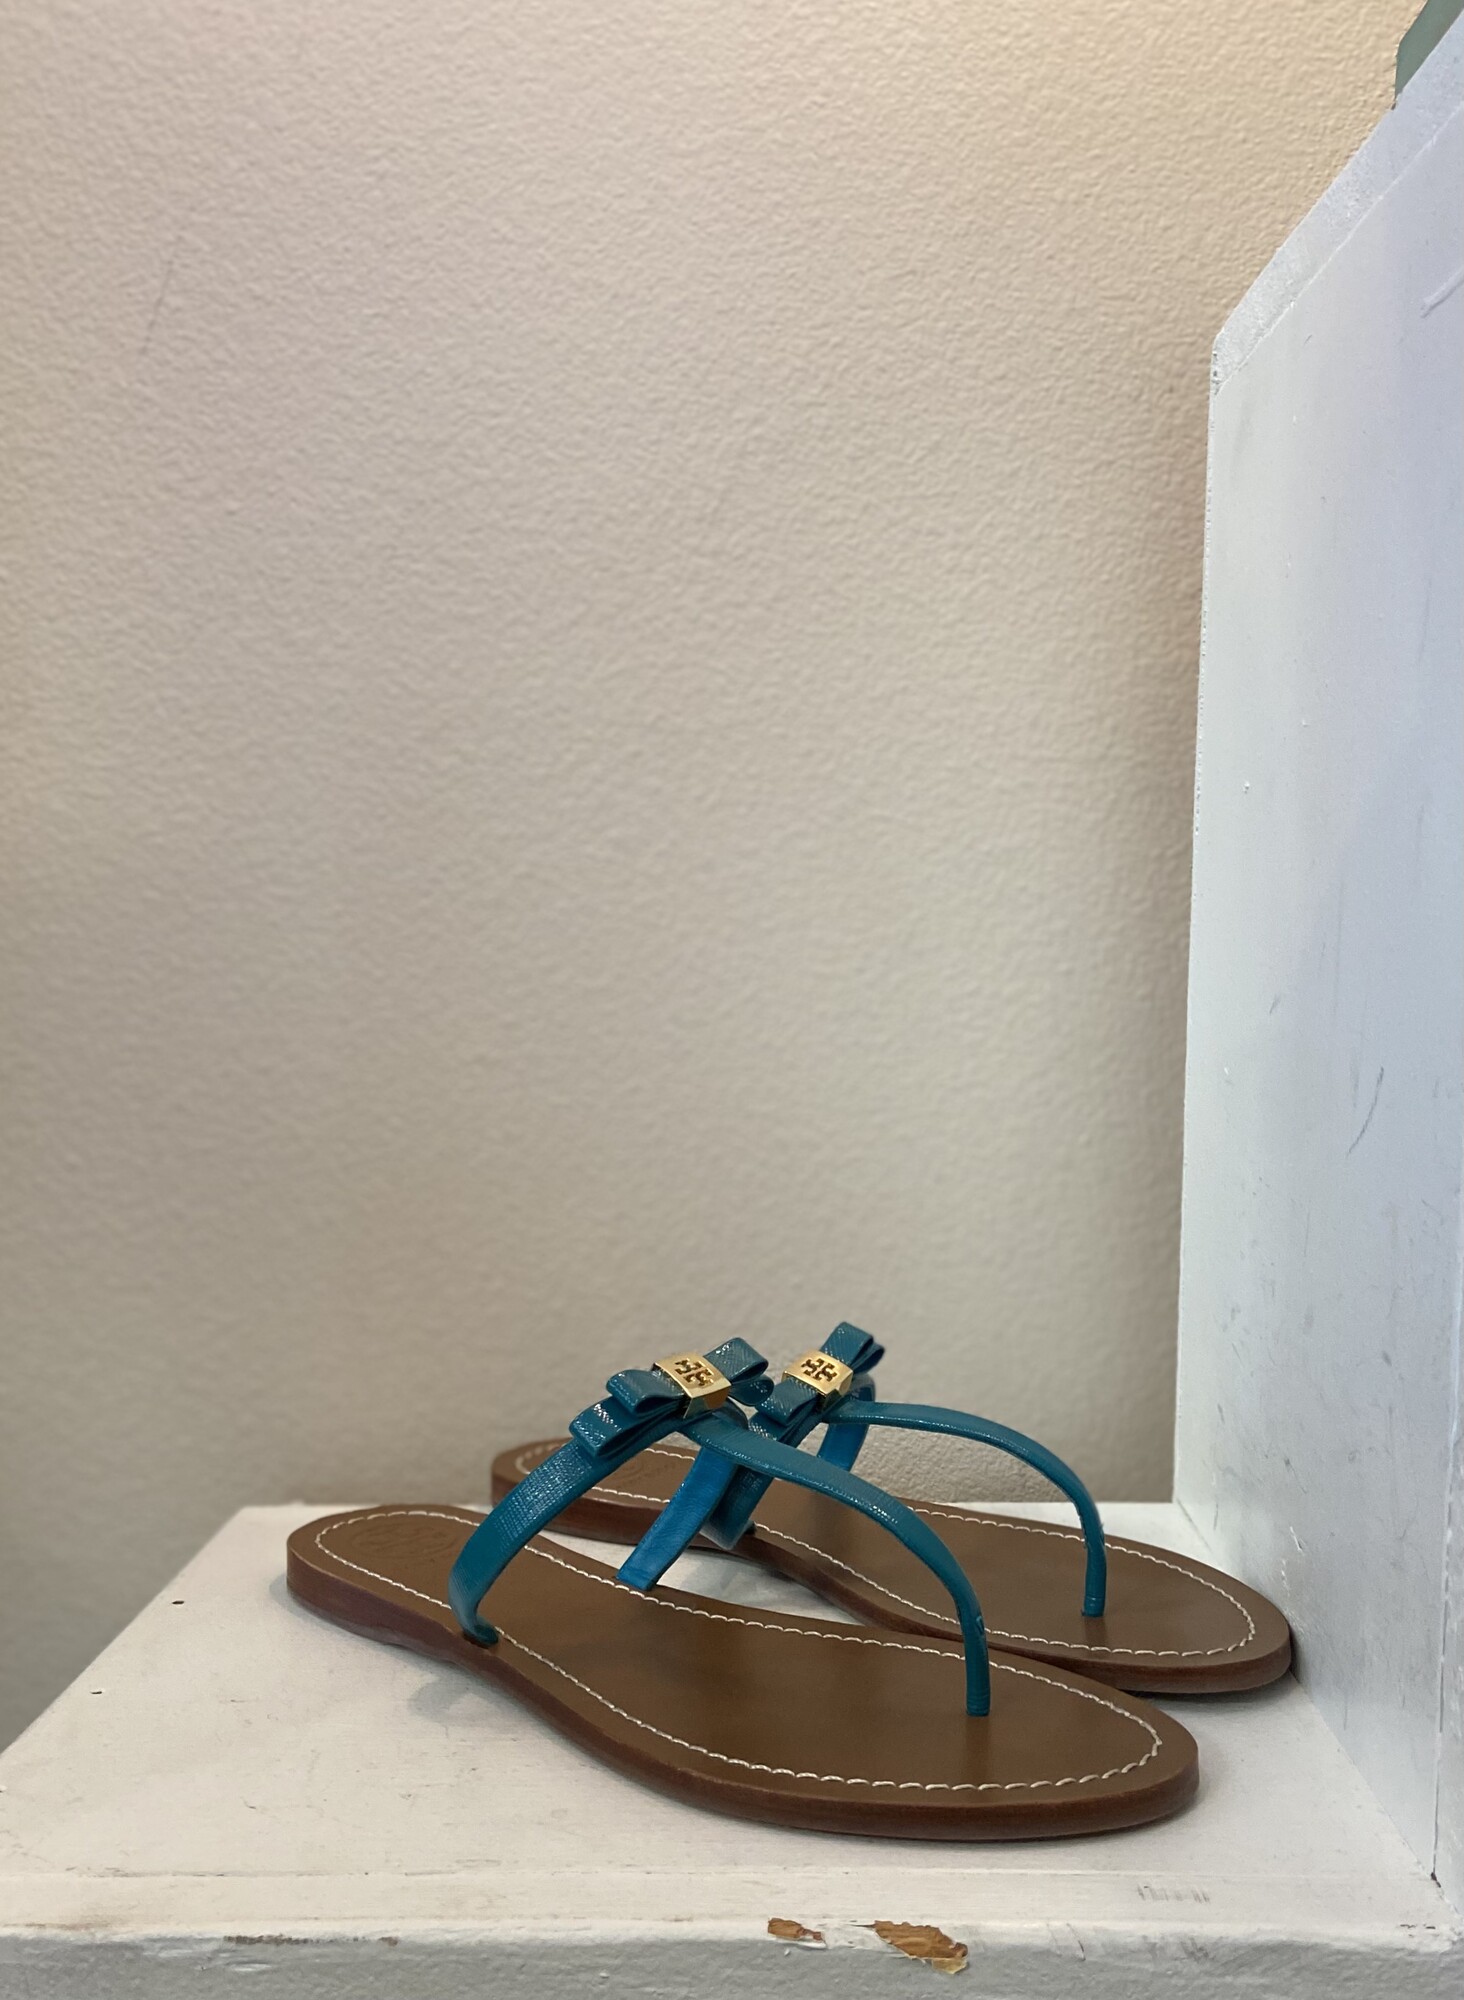 NWT Teal Patent Sandal
Teal/Gld
Size: 9.5 R $150